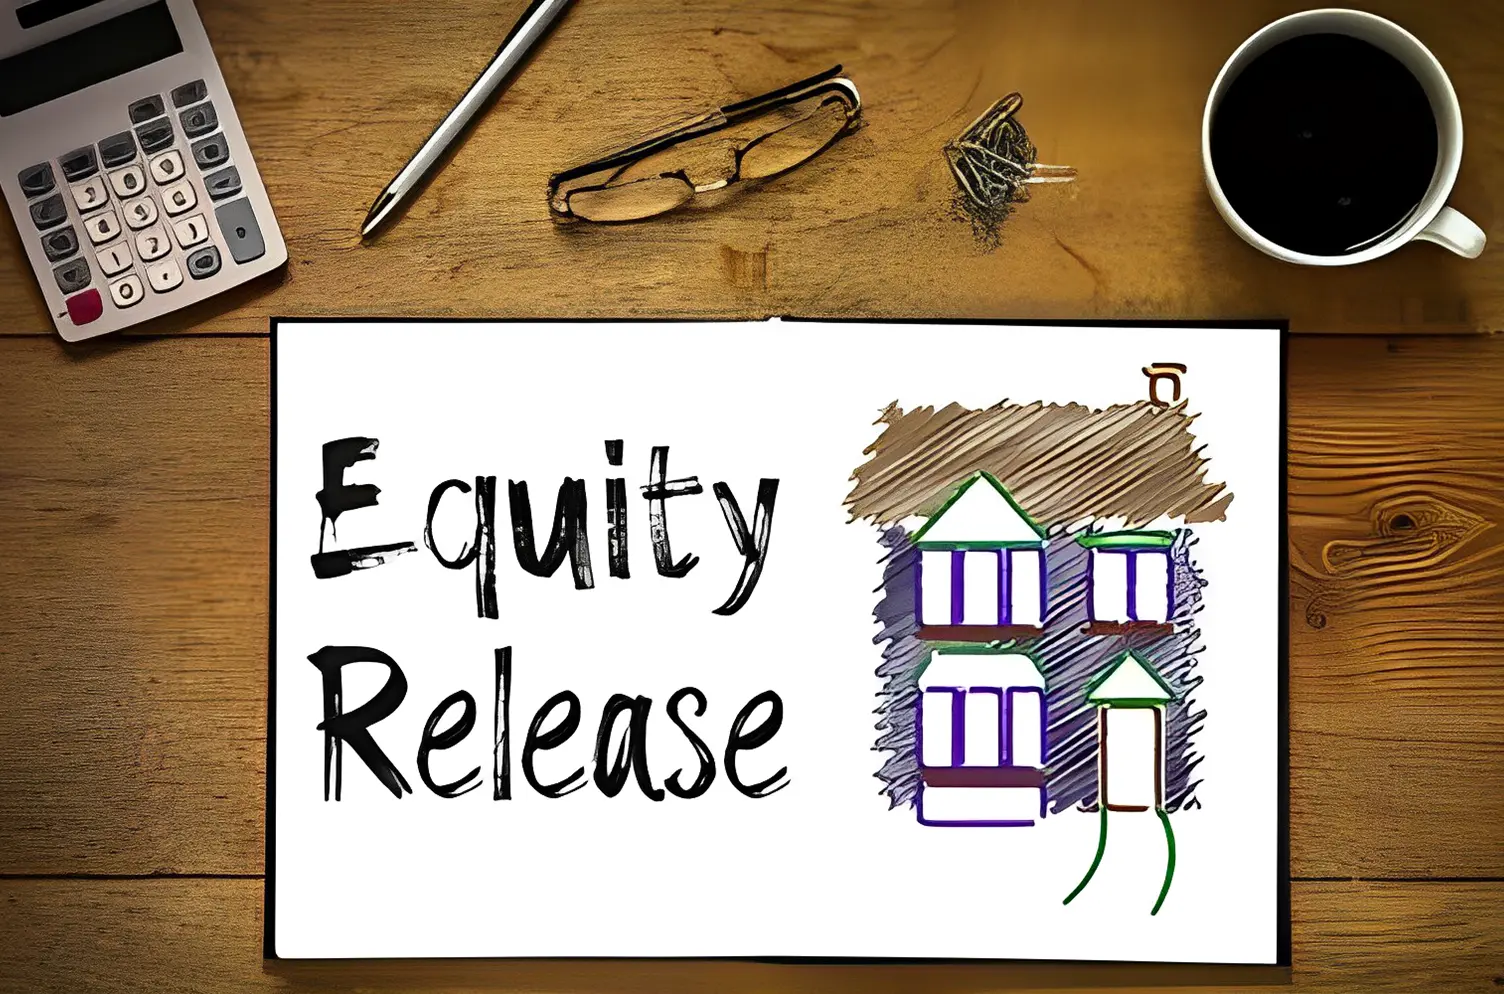 Advantages and Pitfalls of Equity Release Mortgages